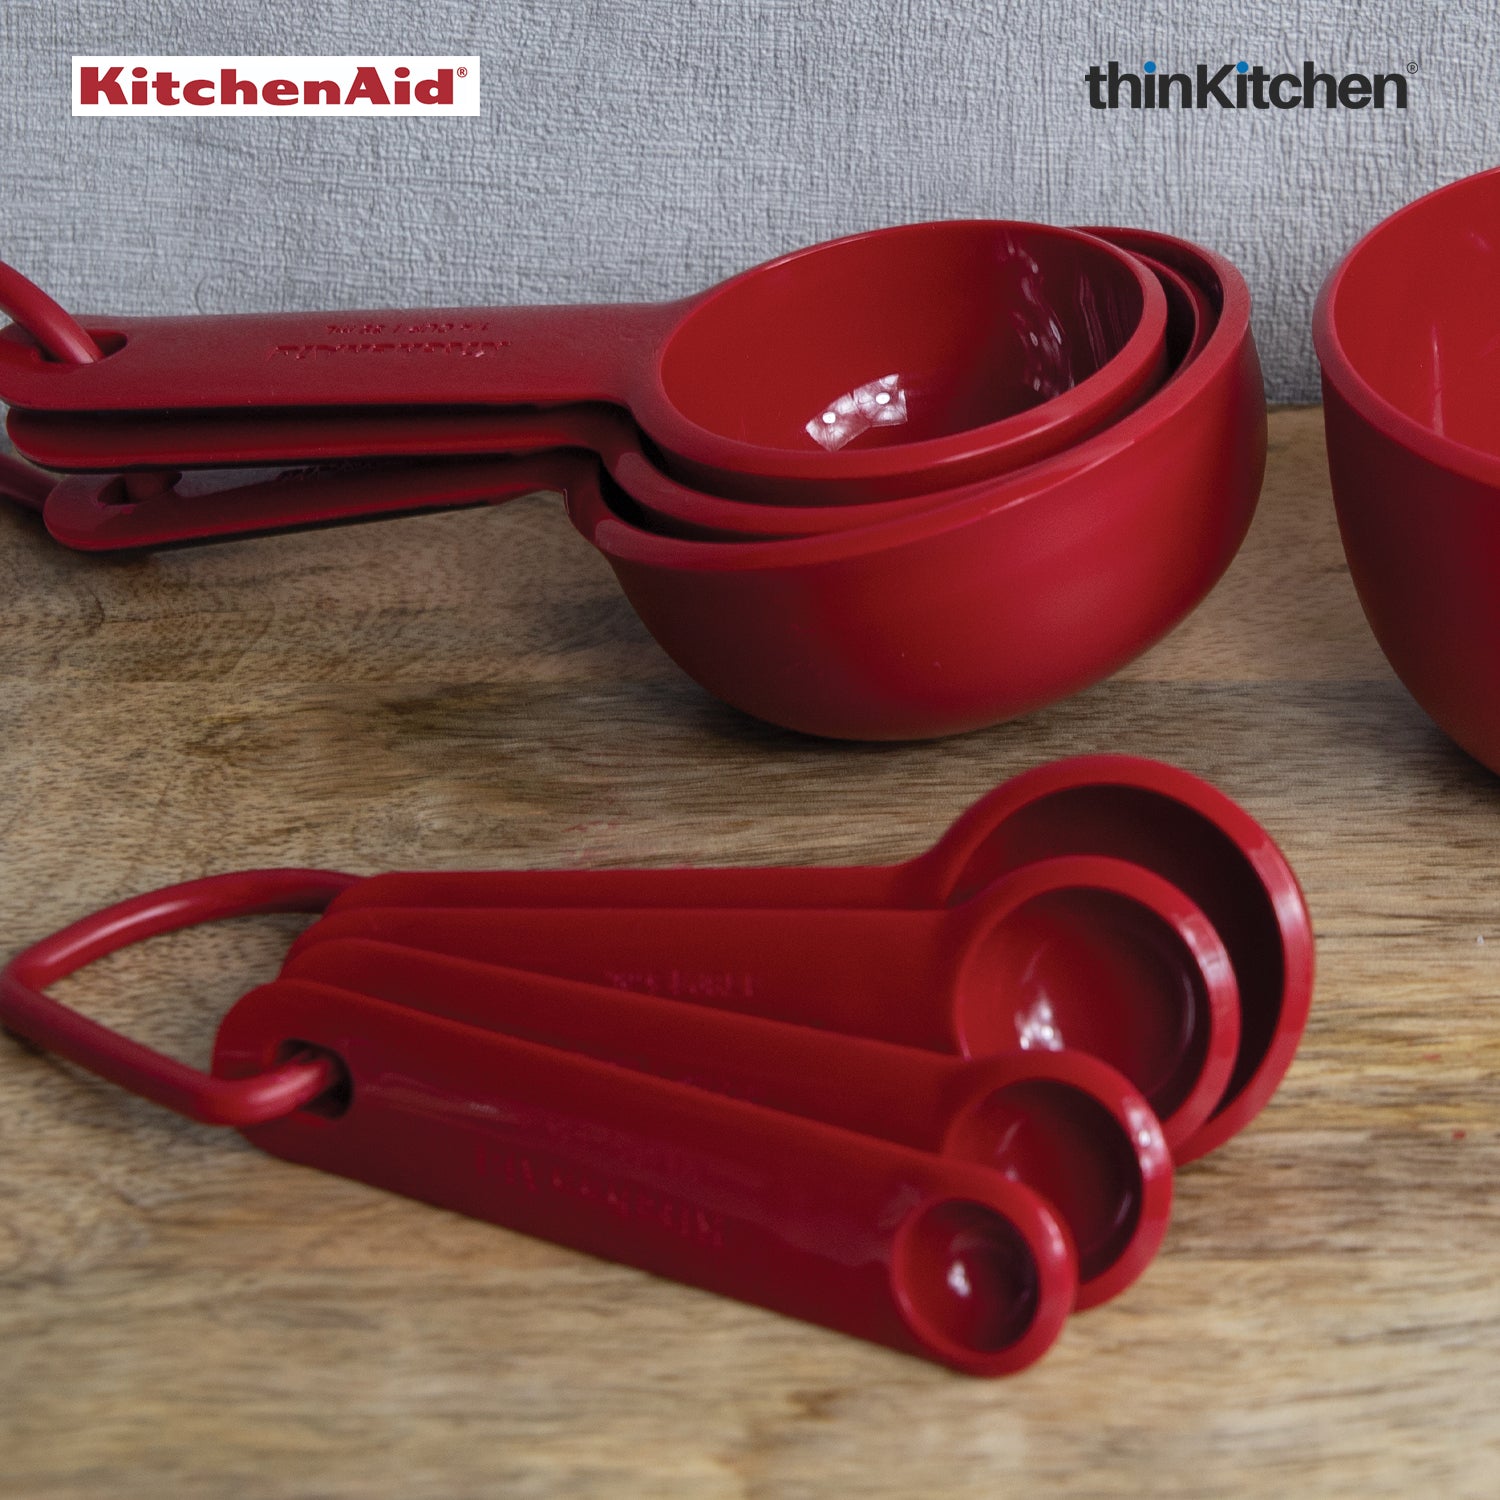 KitchenAid Universal Measuring Spoon Set, Durable and Easy to Clean, Empire  Red, Set of 5